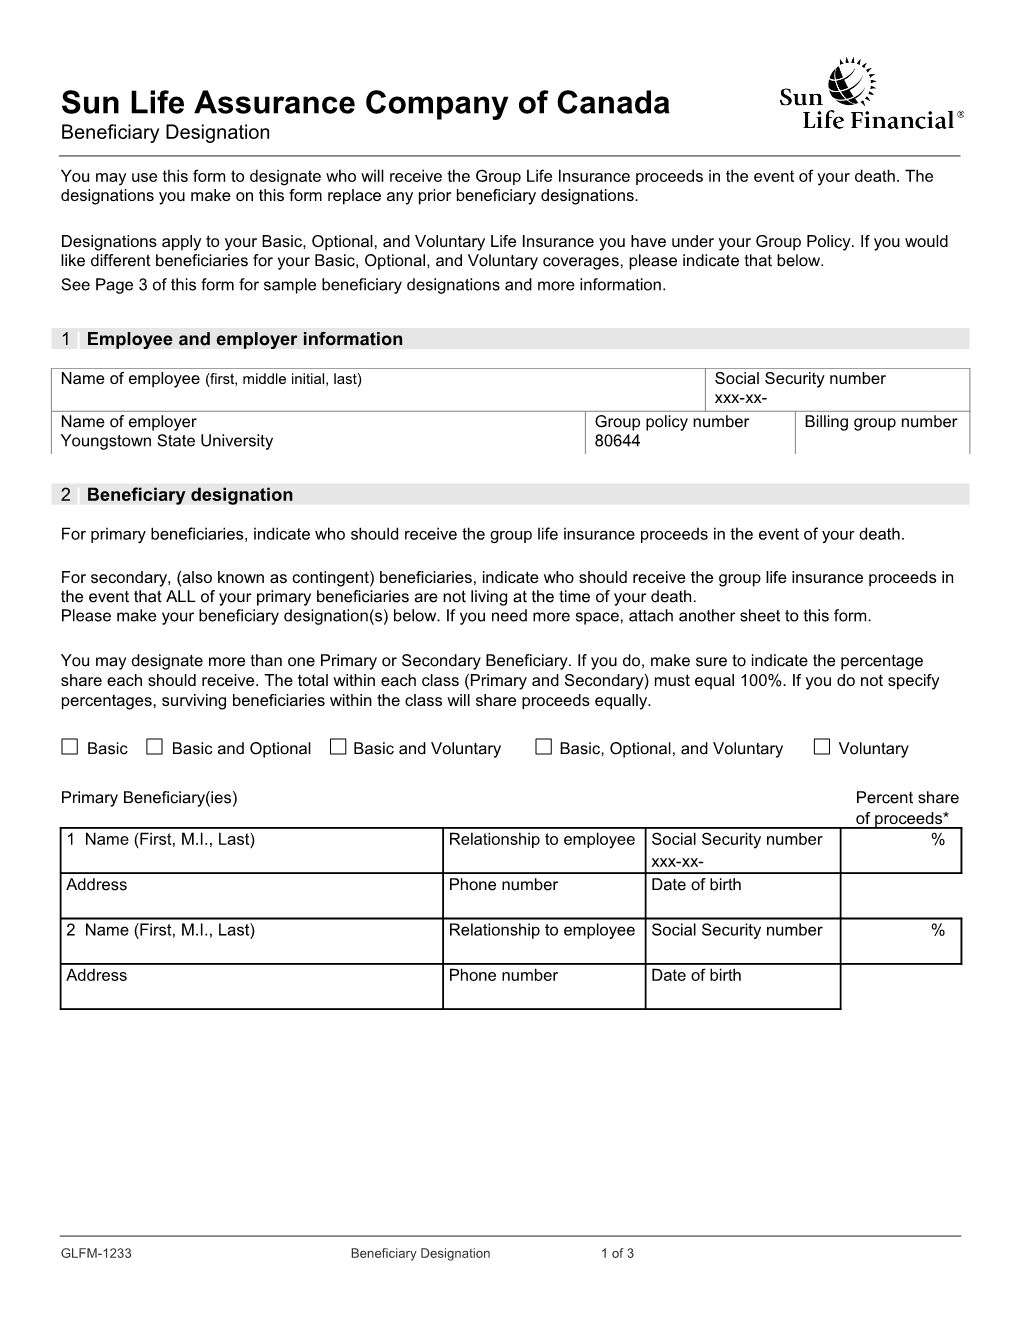 See Page 3 of This Form for Sample Beneficiary Designations and More Information